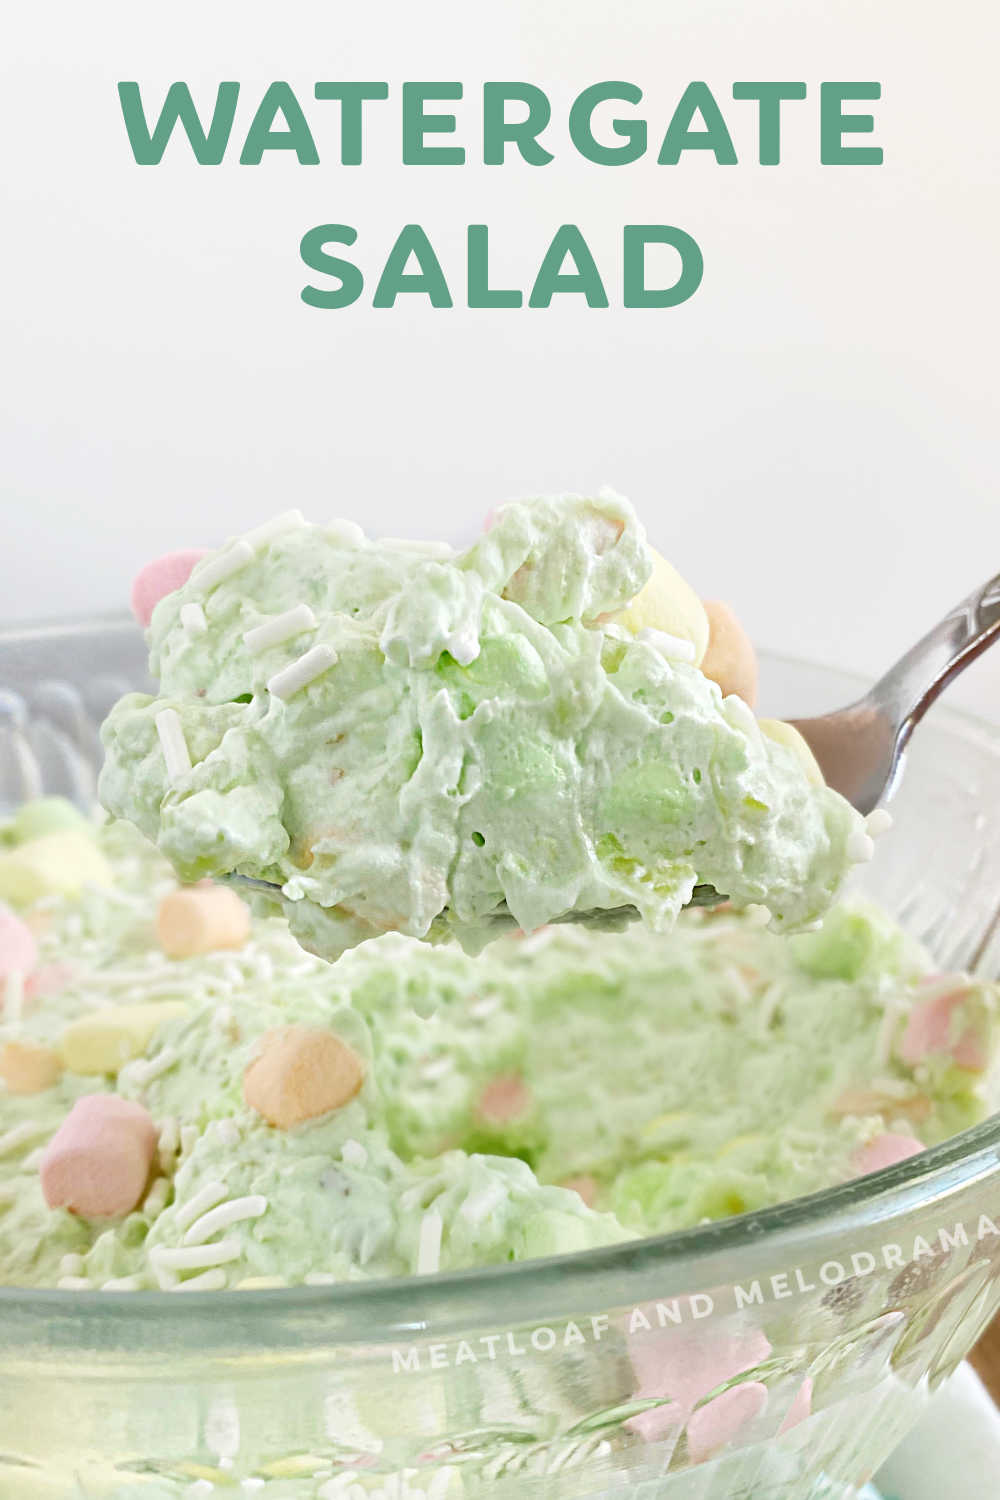 Pistachio Salad recipe, or Watergate Salad, made with pudding mix, Cool Whip, pineapple and marshmallows is fluffy, light and delicious! Serve as an easy side dish   or dessert salad for potlucks, parties, picnics or holidays. It's a classic retro recipe that's worth revisiting! via @meamel